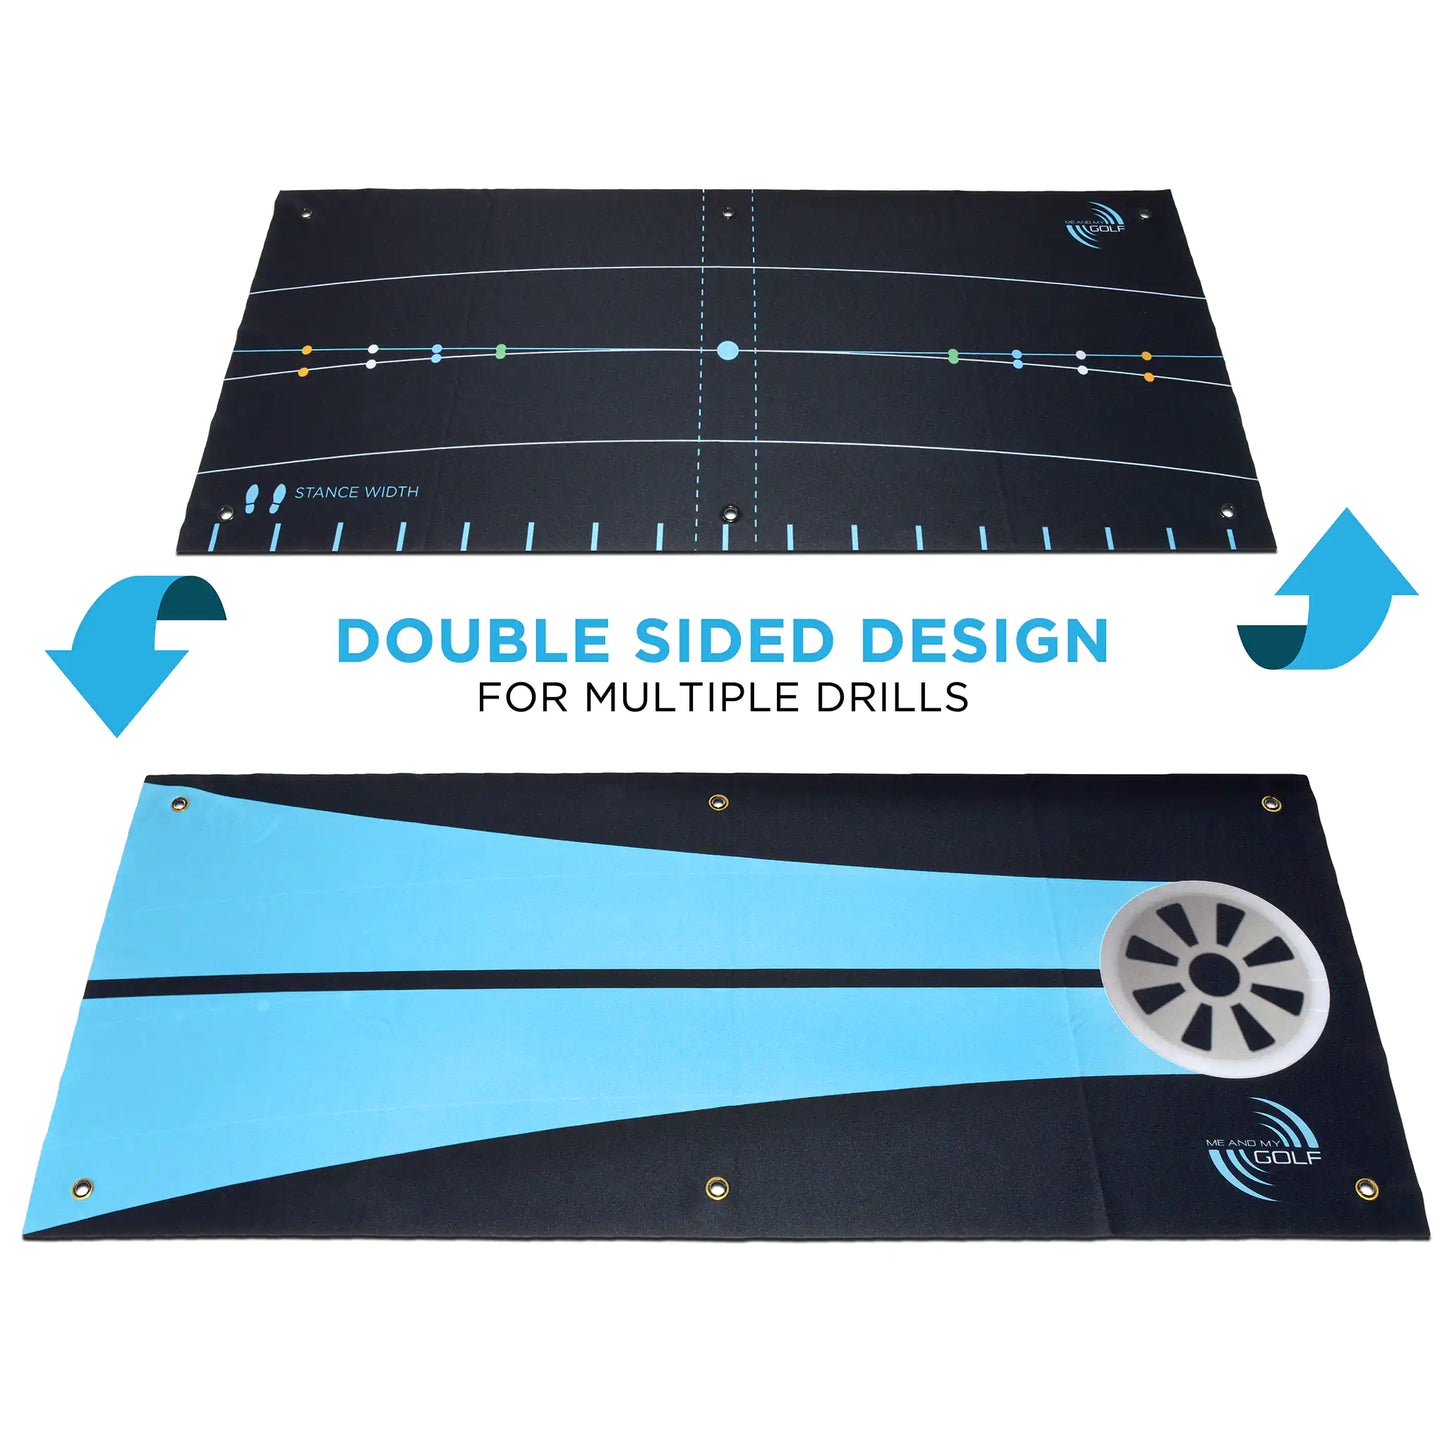 Stroke Trainer double sided design